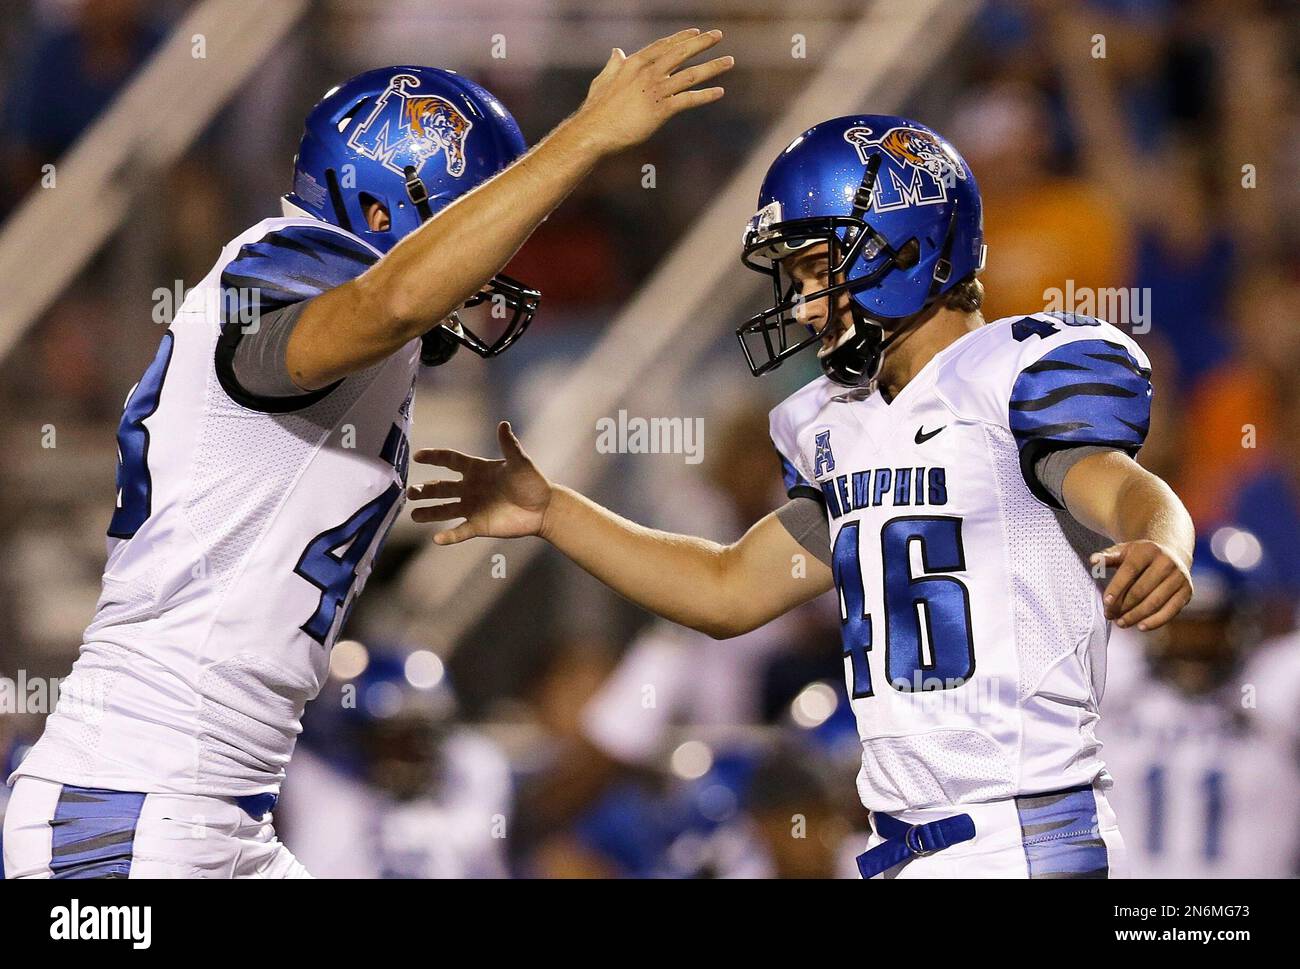 Memphis kicker Jake Elliott (46) celebrates with holder Tom Hornsey, left,  after Elliott kicked a 41-yard field goal against Middle Tennessee in the  second quarter of an NCAA college football game on